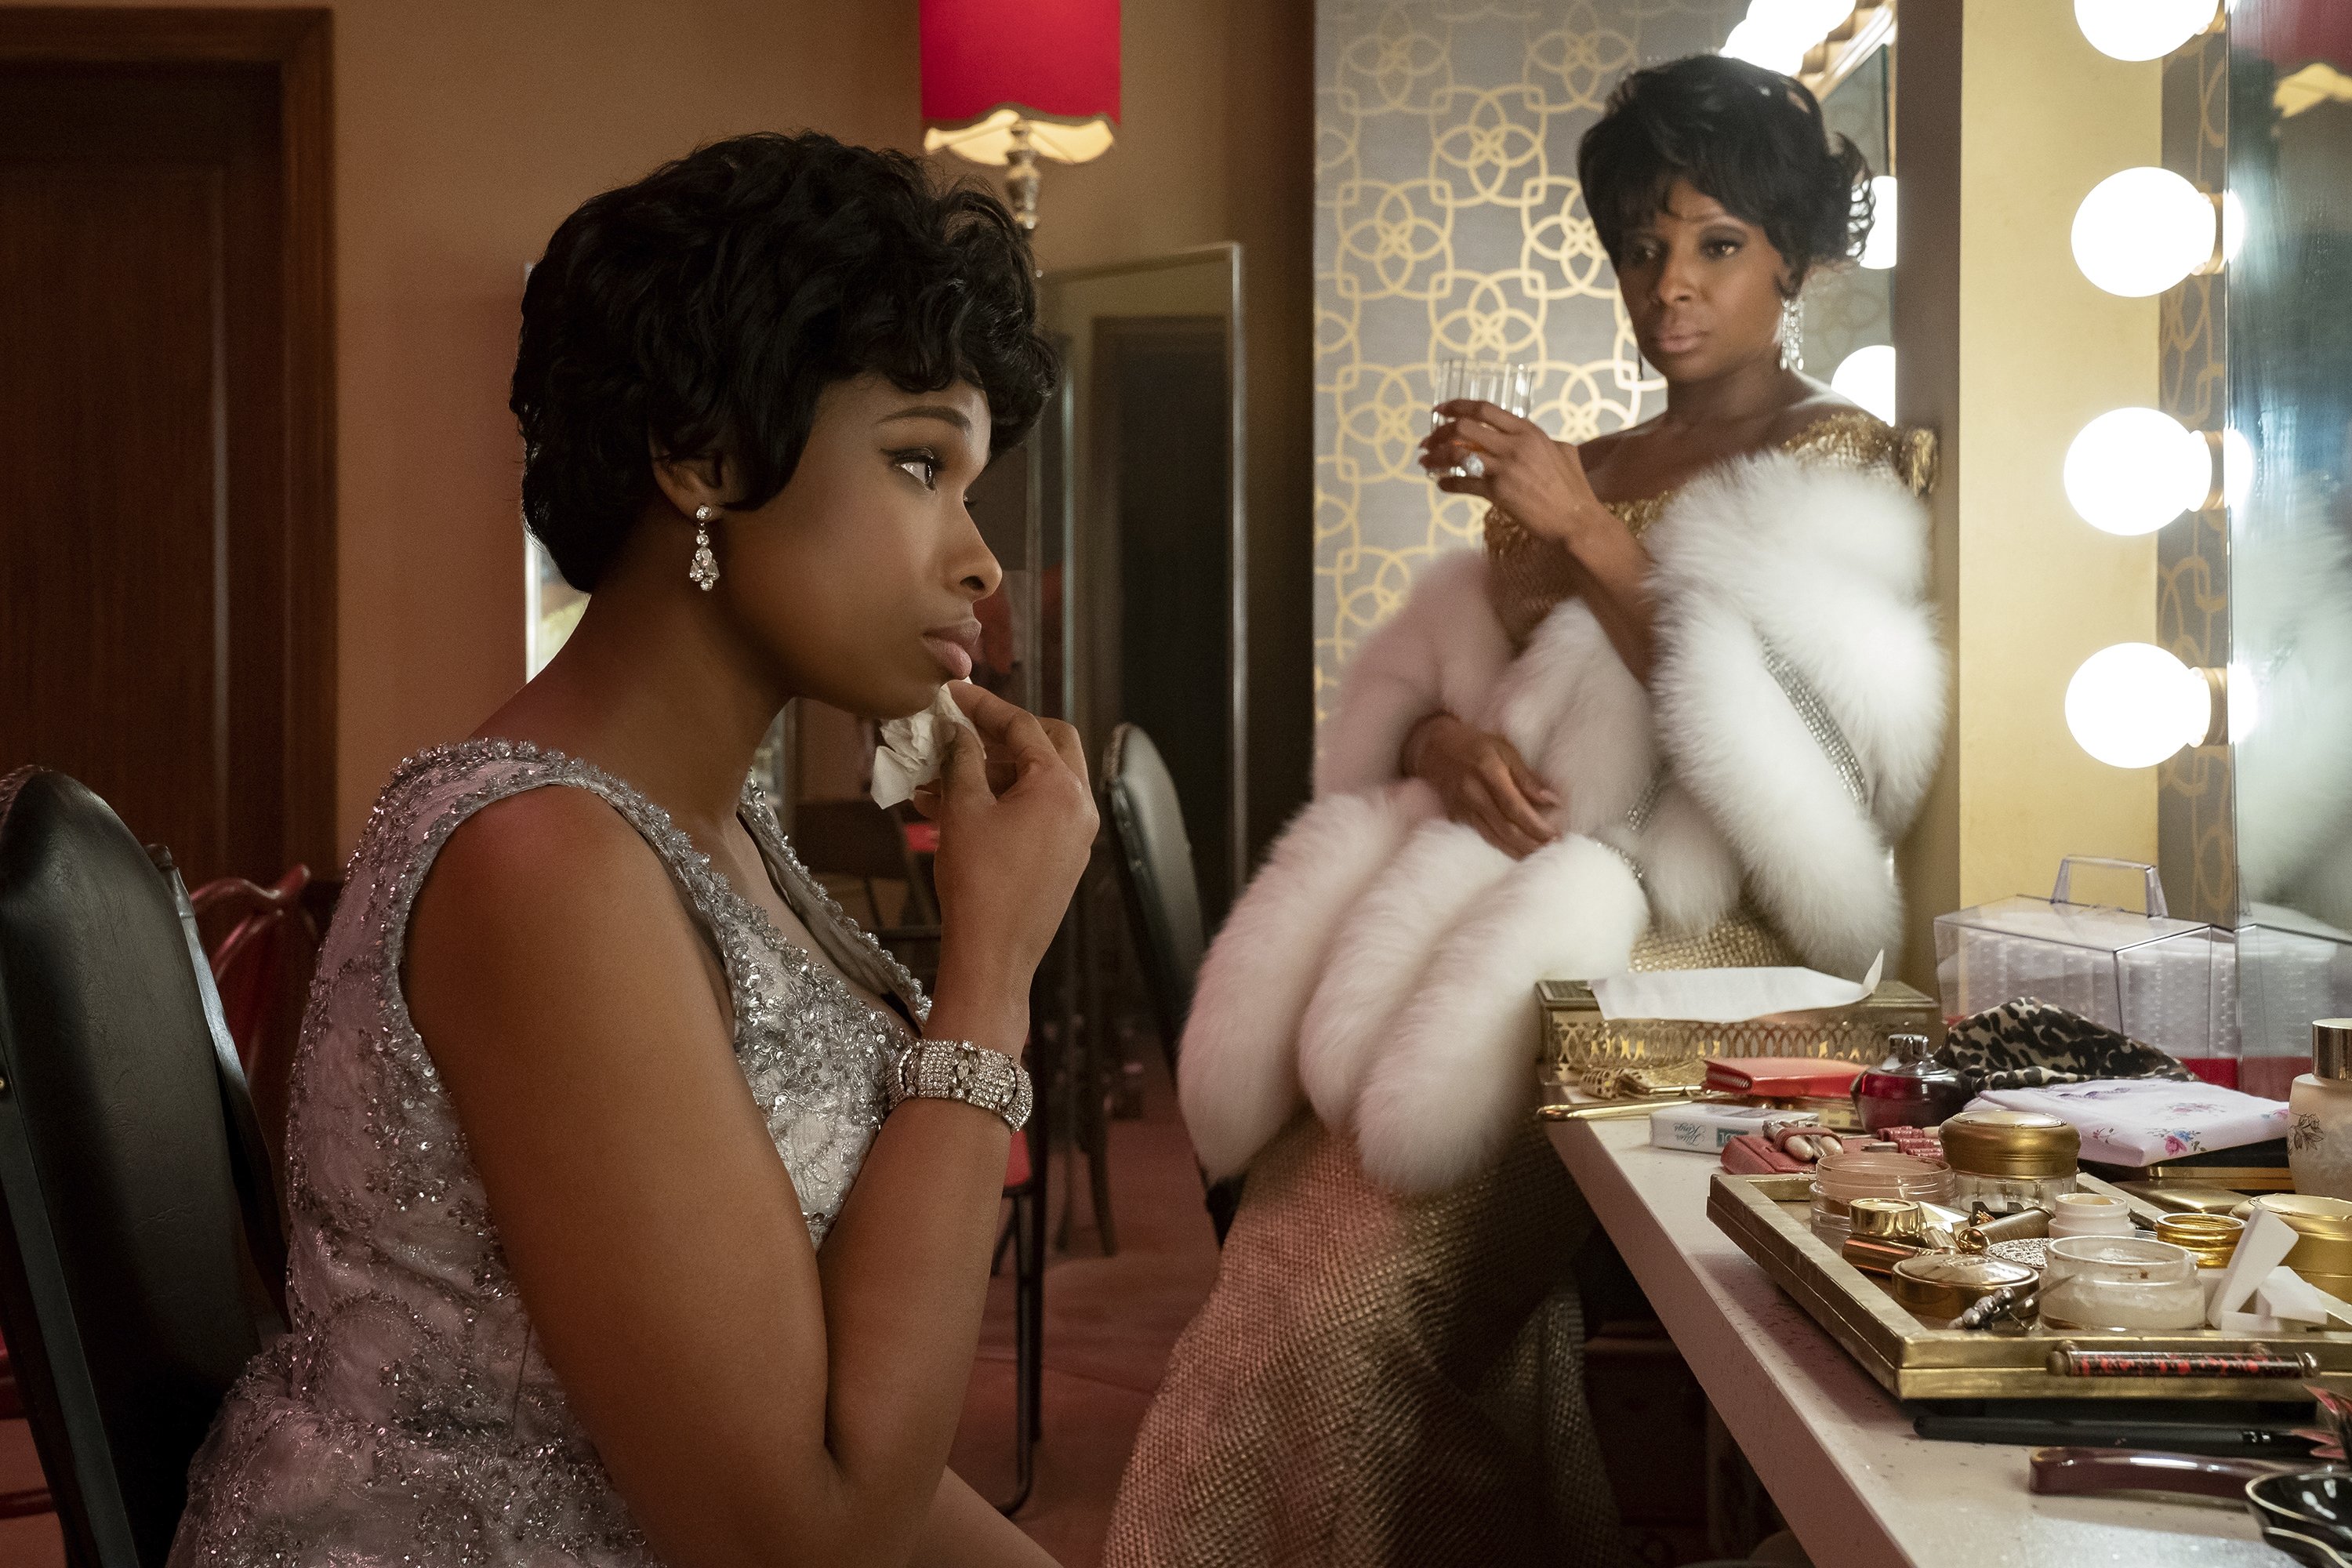 Jennifer Hudson stars as Aretha Franklin (L) and Mary J. Blige stars as Dinah Washington (R) in a scene from "Respect." (MGM via AP)